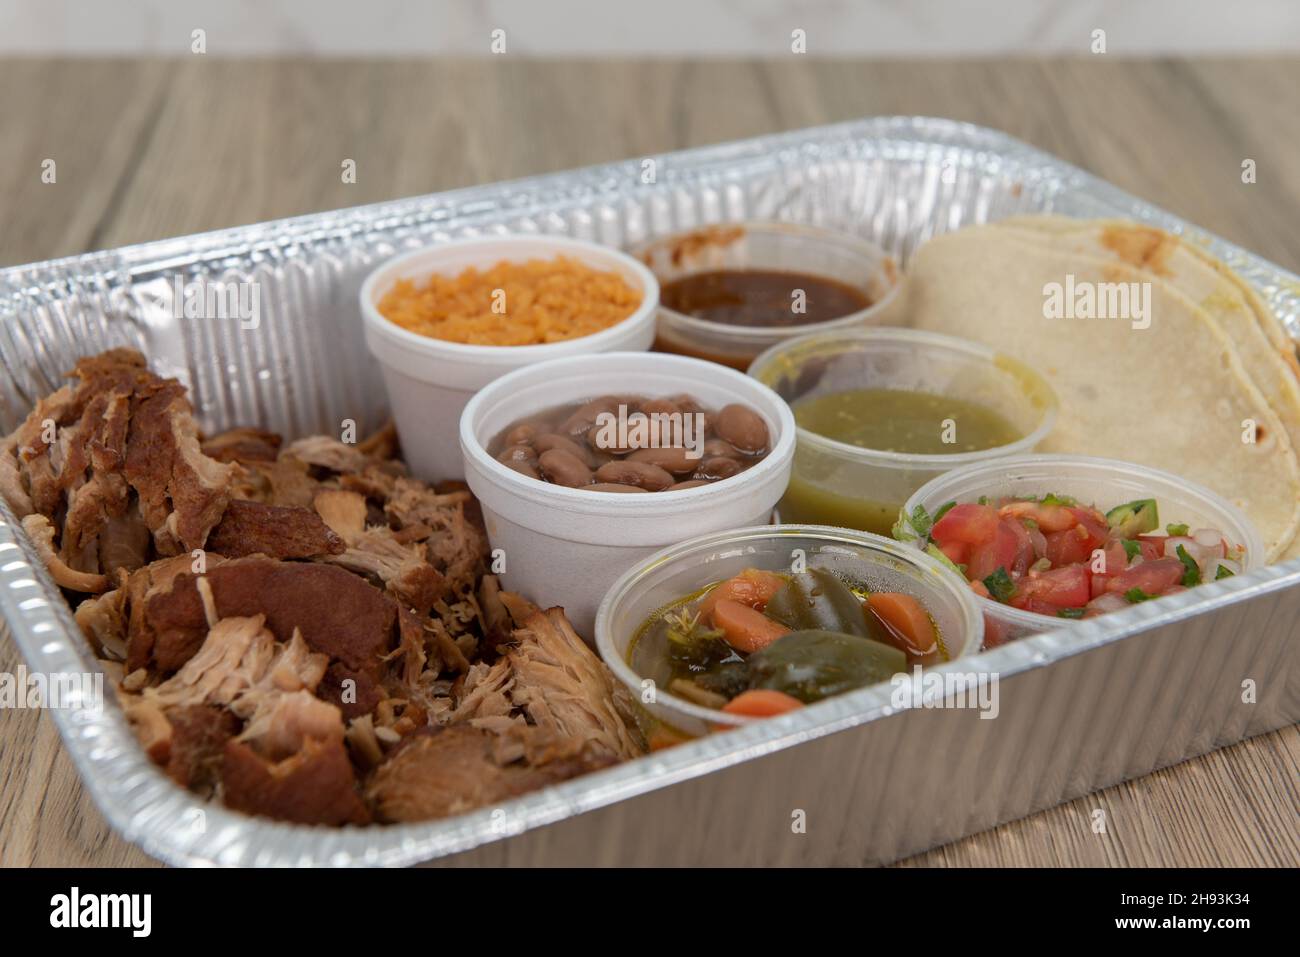 Family sized portions of carnitas pork meat with rice, beans, and salsa to have tacos for everyone. Stock Photo